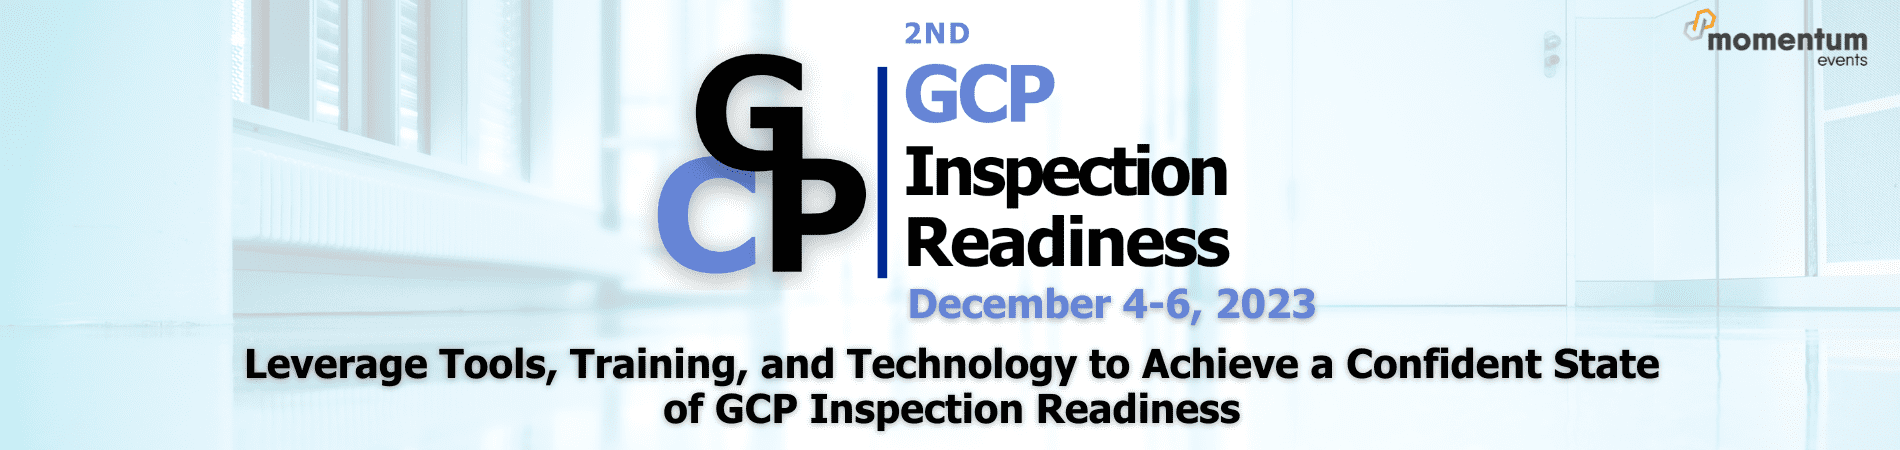 2nd GCP Inspection Readiness, December 4-6, 2023, Leverage Tools, Training, and Technology to Achieve a Confident State of GCP Inspection Readiness